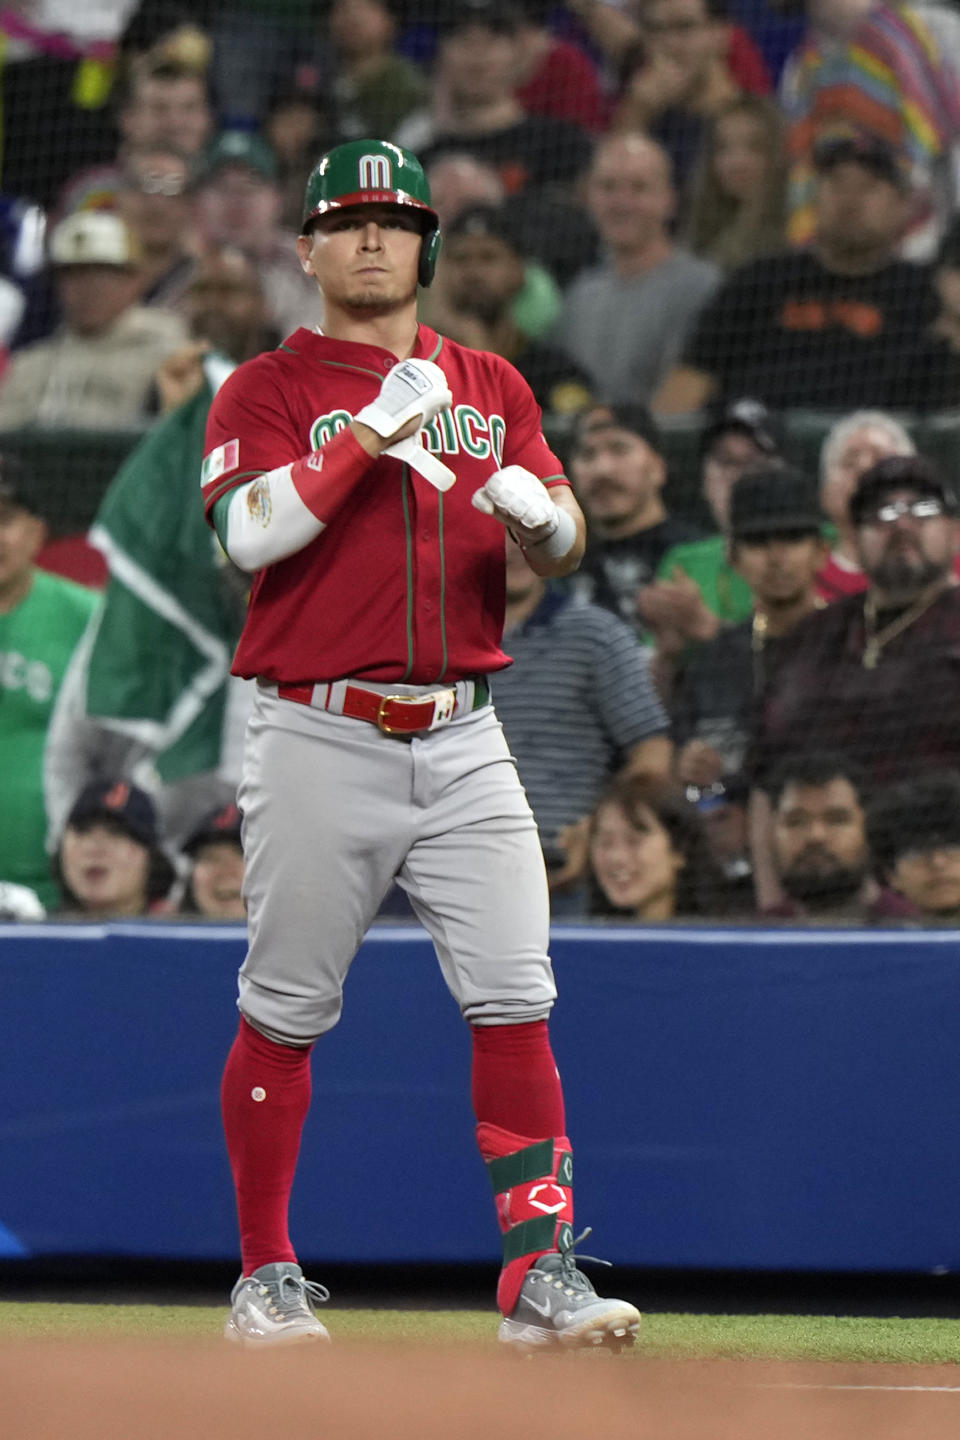 Mexico's Luis Urias celebrates after getting a base hit during the second inning of a World Baseball Classic game against Japan, Monday, March 20, 2023, in Miami. (AP Photo/Wilfredo Lee)